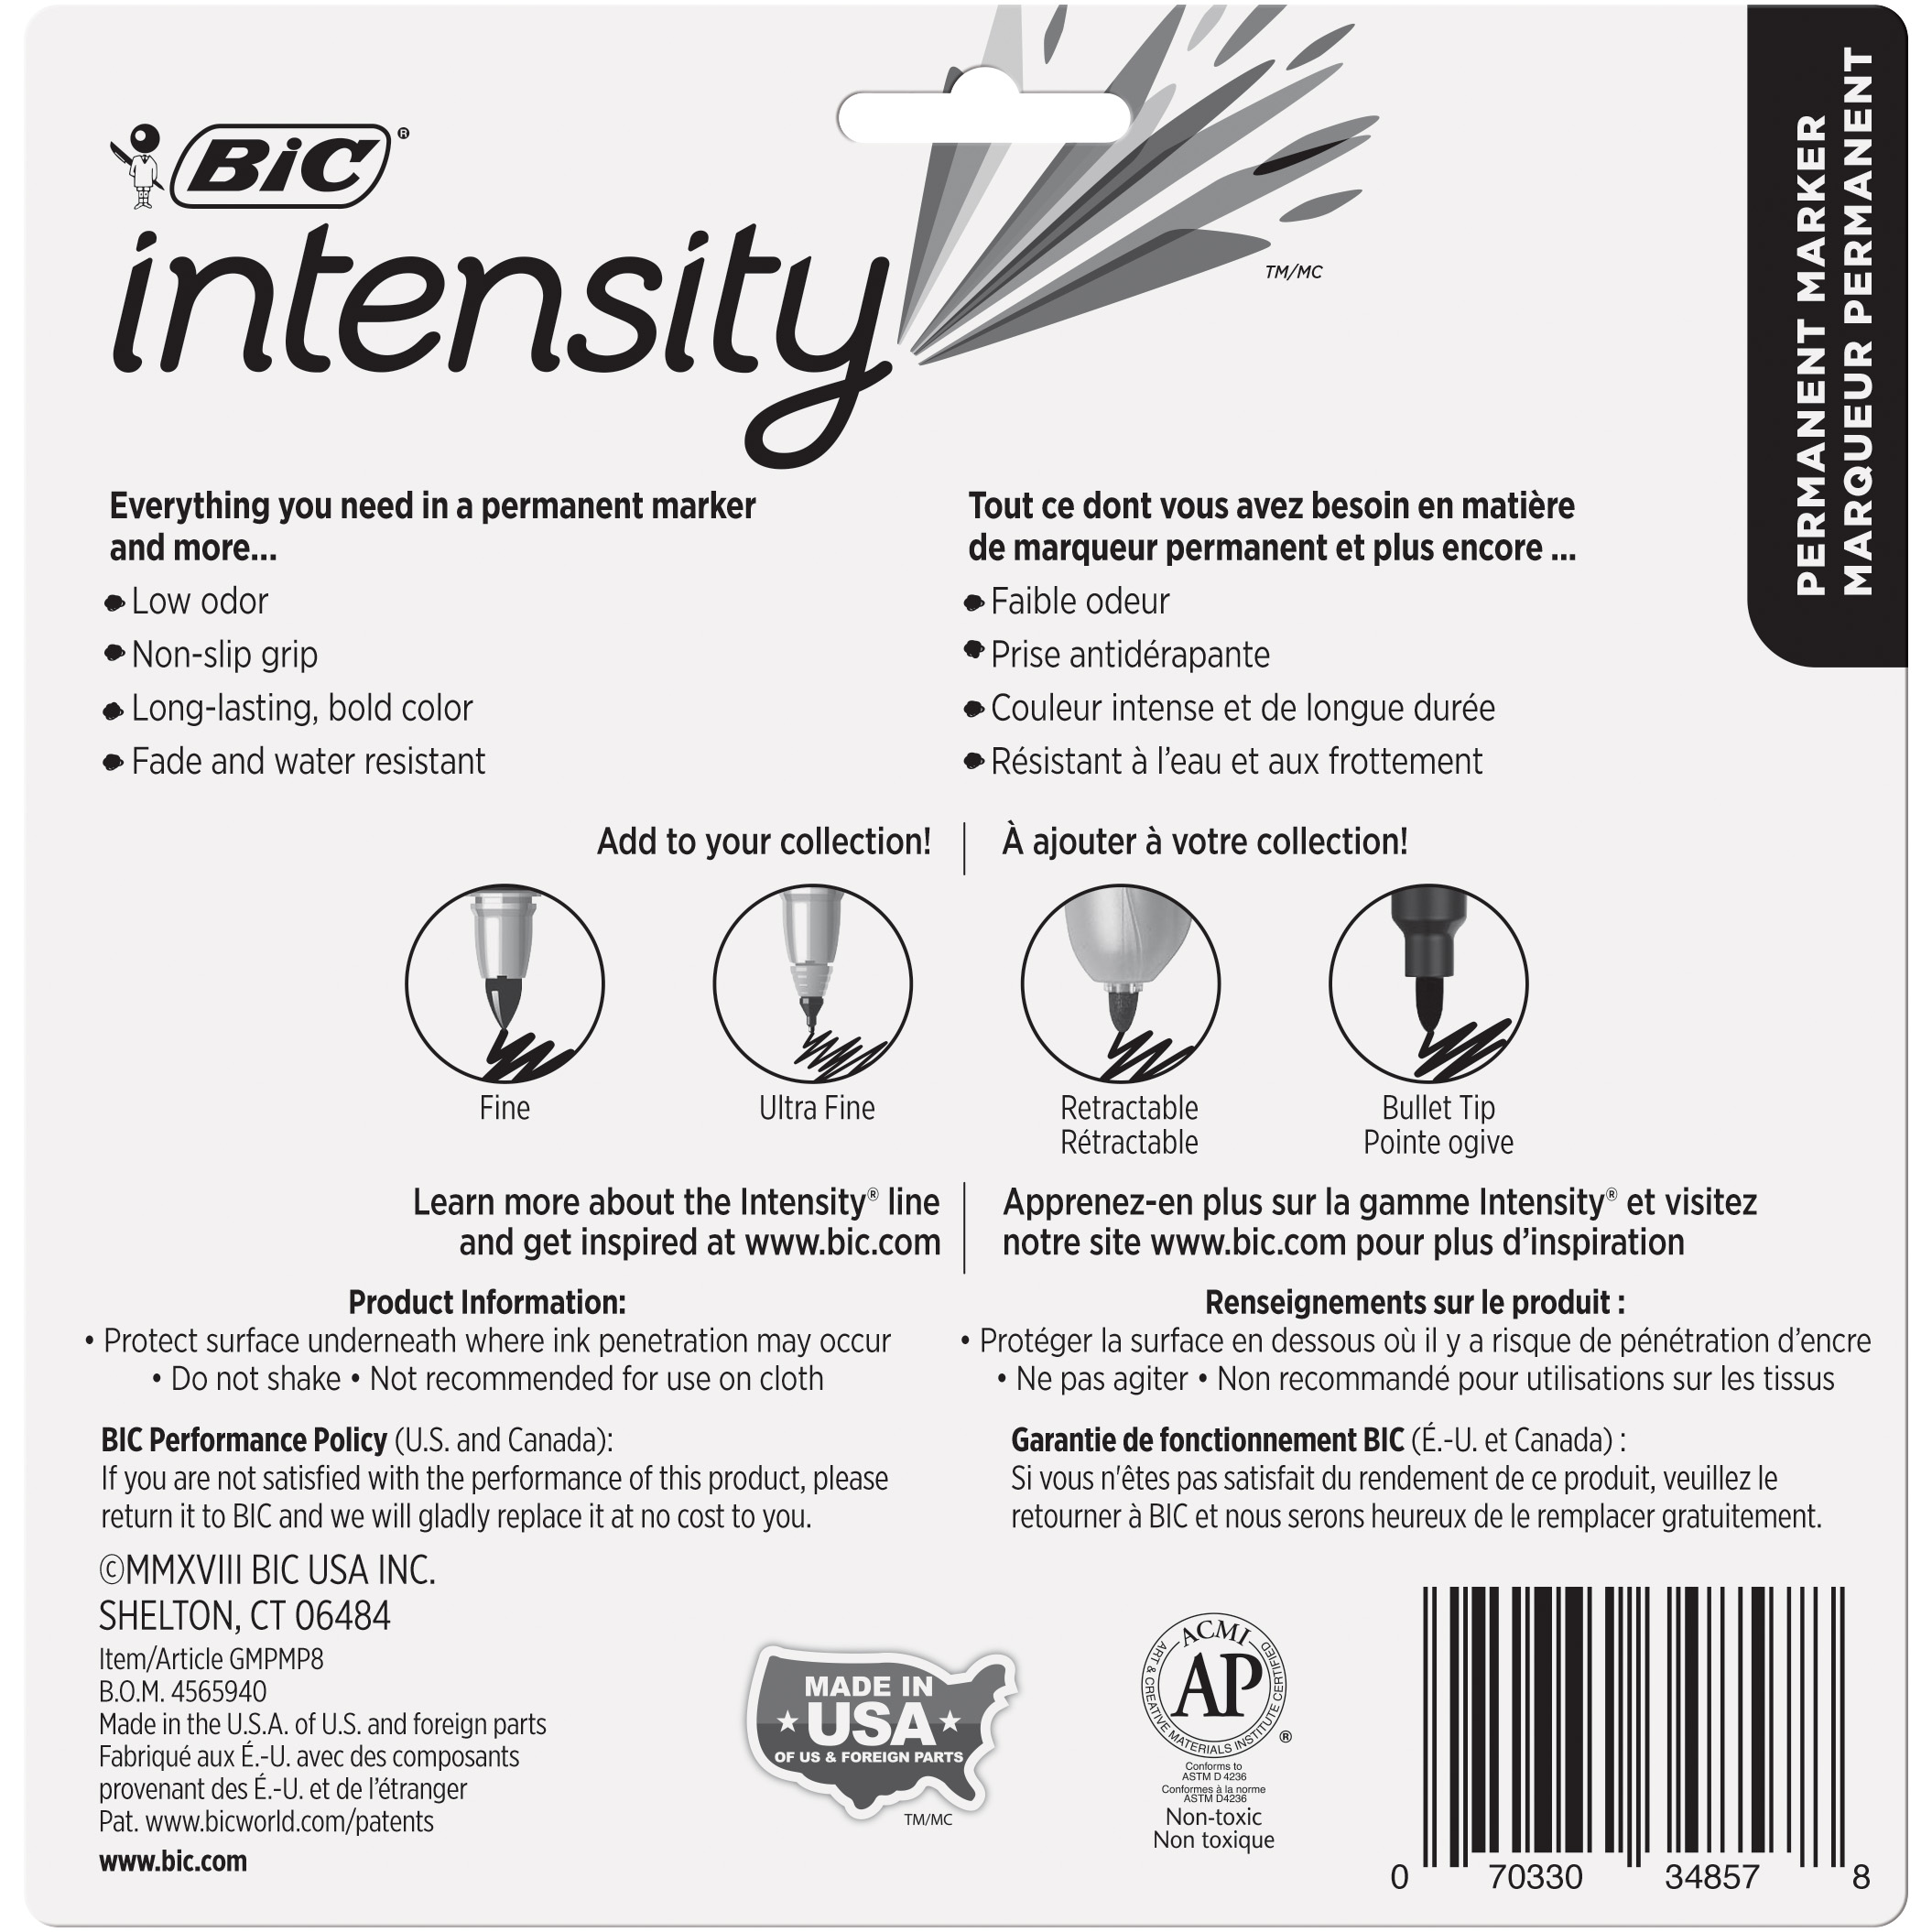 BIC Intensity Permanent Marker Bundle, Assorted Tips and Colors, 56-Count - image 4 of 12